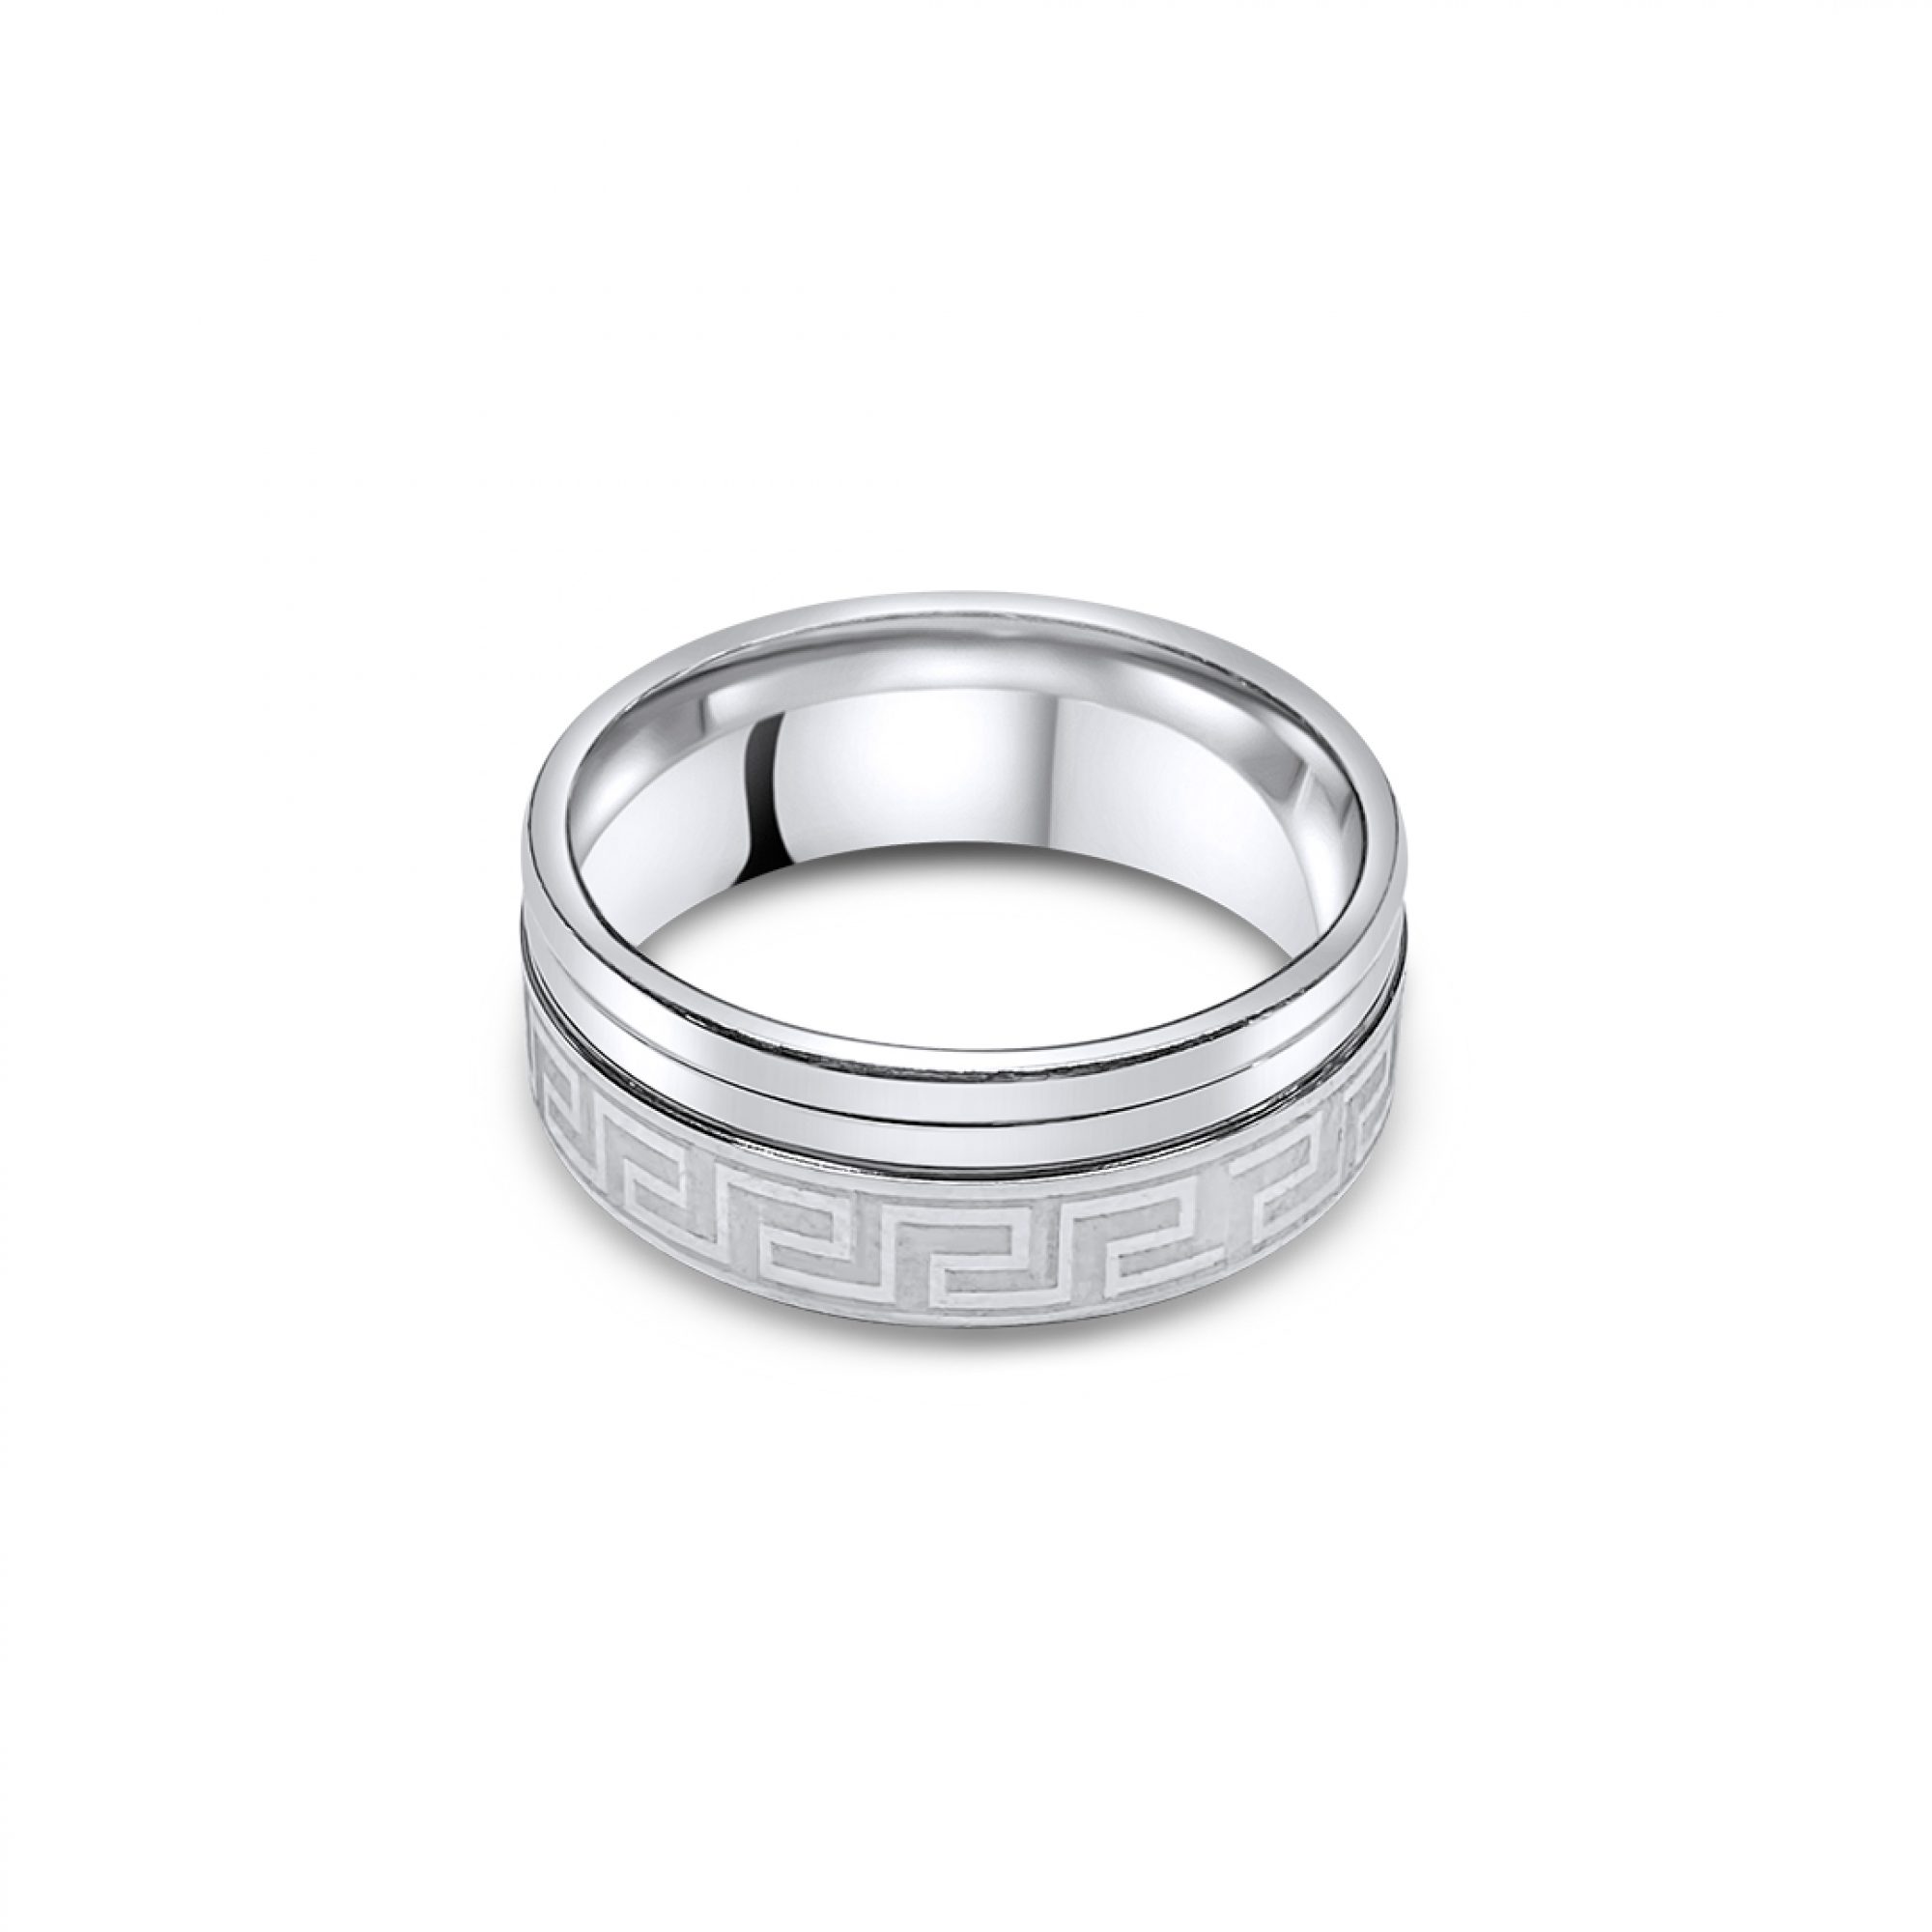 Steel ring with meander